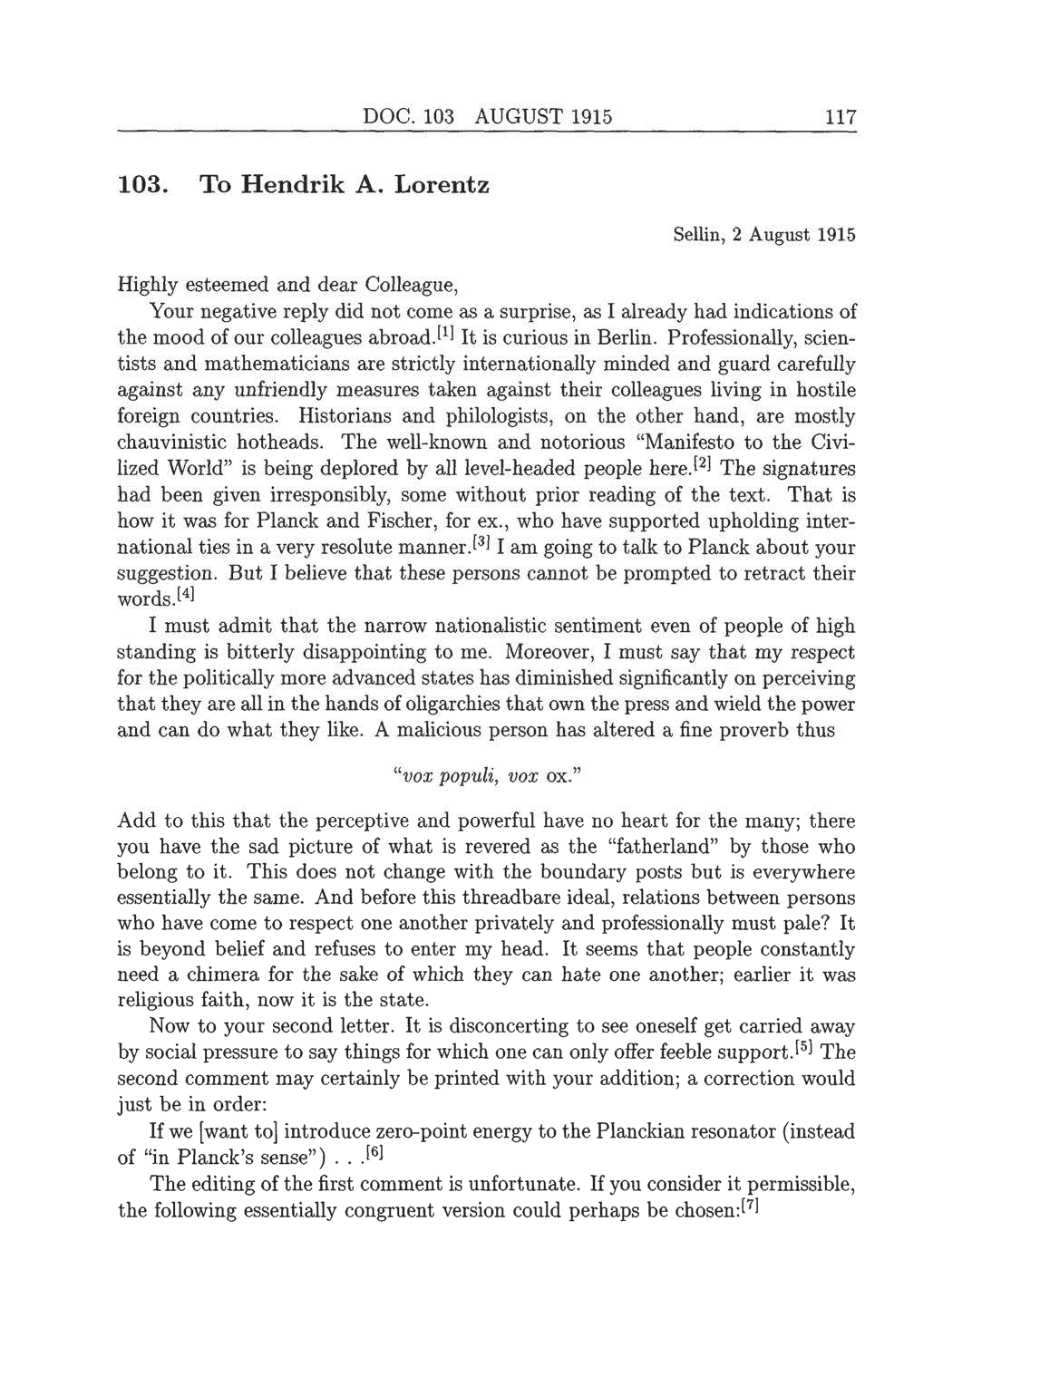 Volume 8: The Berlin Years: Correspondence, 1914-1918 (English translation supplement) page 117